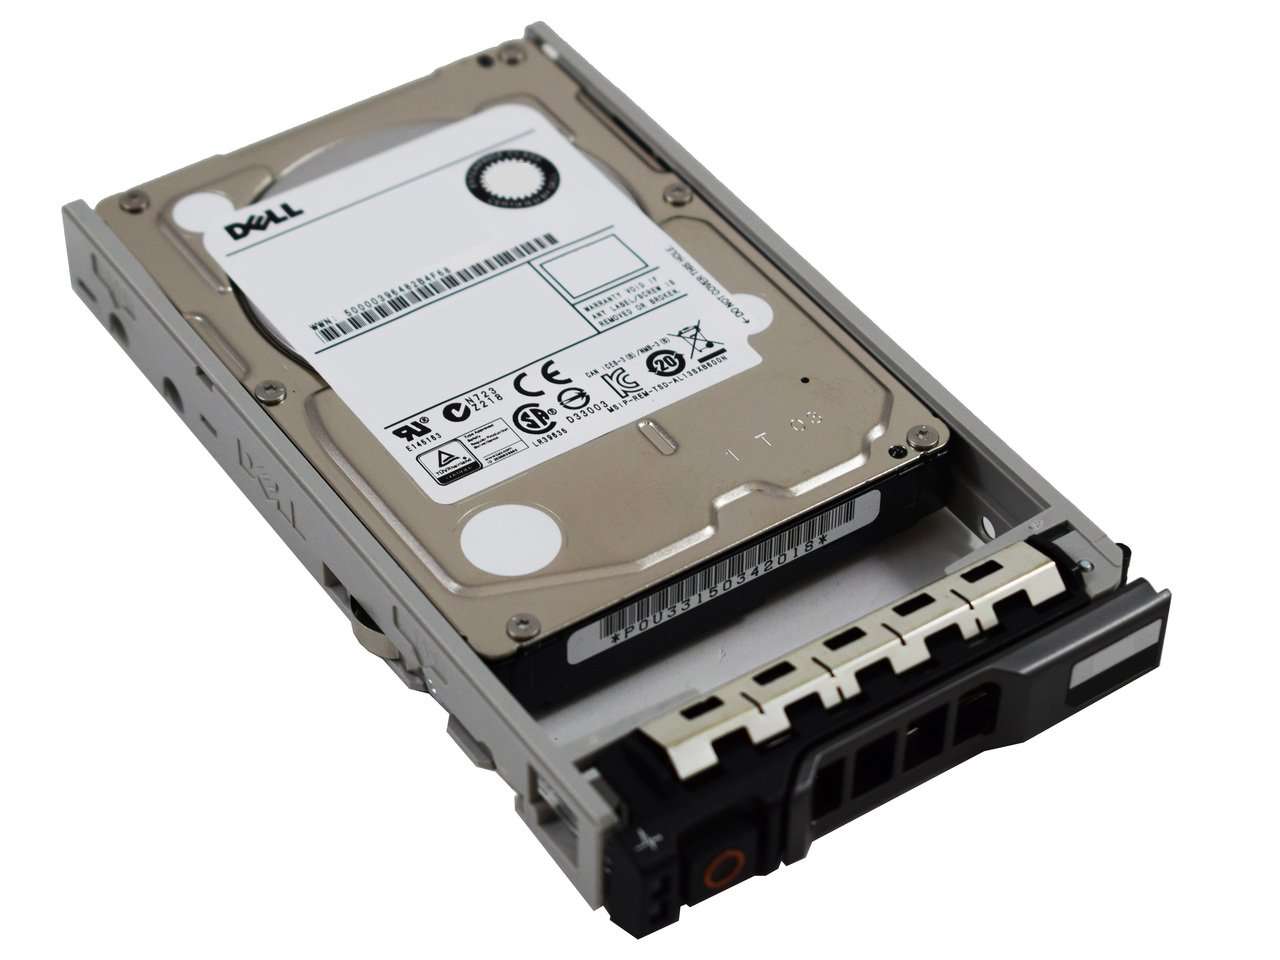 Dell G13 400-AHNS 1.2TB 10K RPM SAS 12Gb/s 512n 2.5" SED Manufacturer Recertified HDD